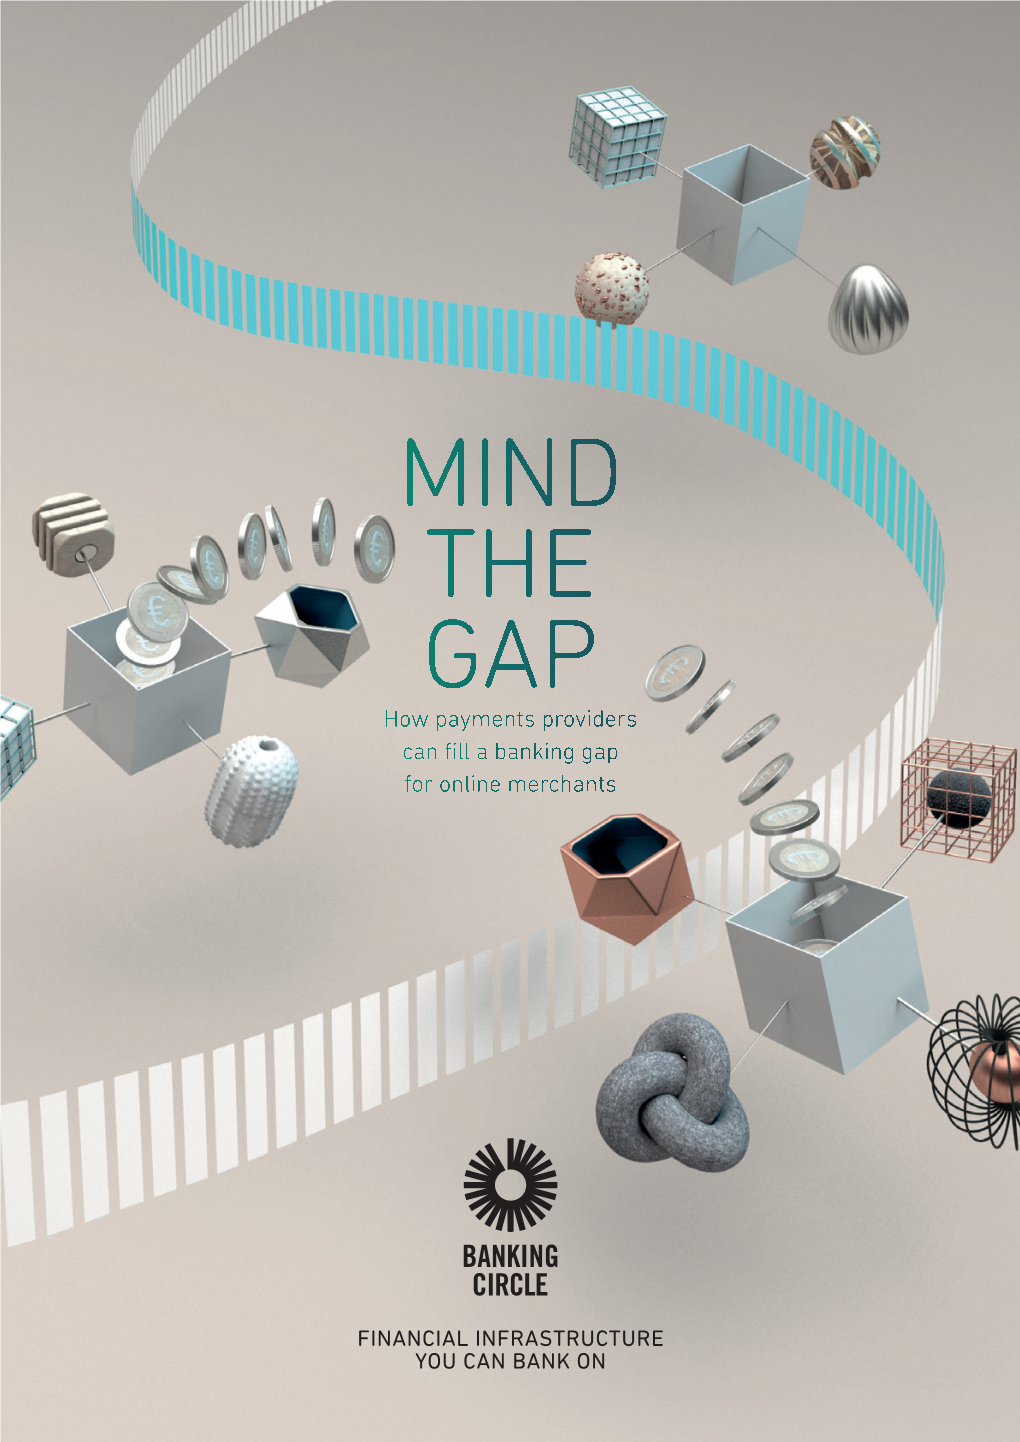 MIND the GAP How Payments Providers Can Fill a Banking Gap for Online Merchants